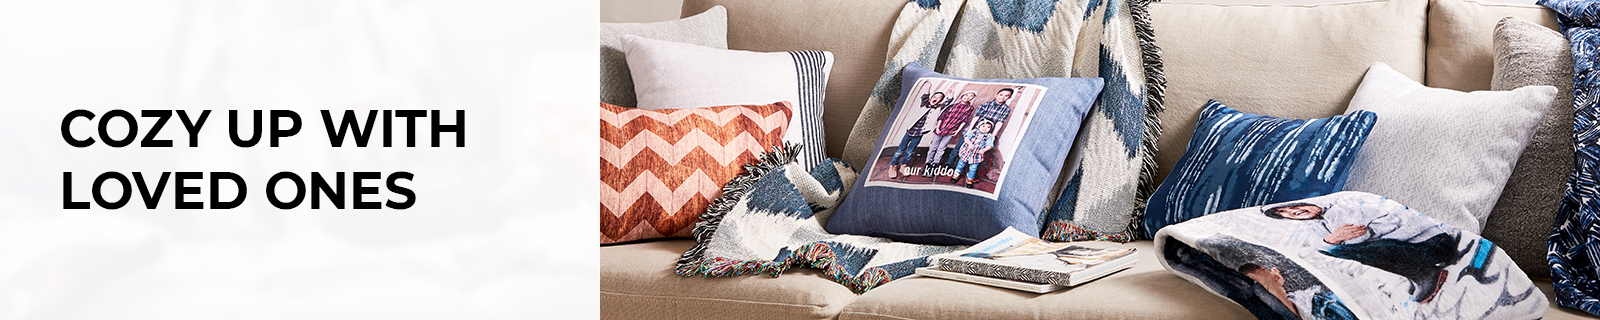 Custom Blankets And Pillows Shutterfly